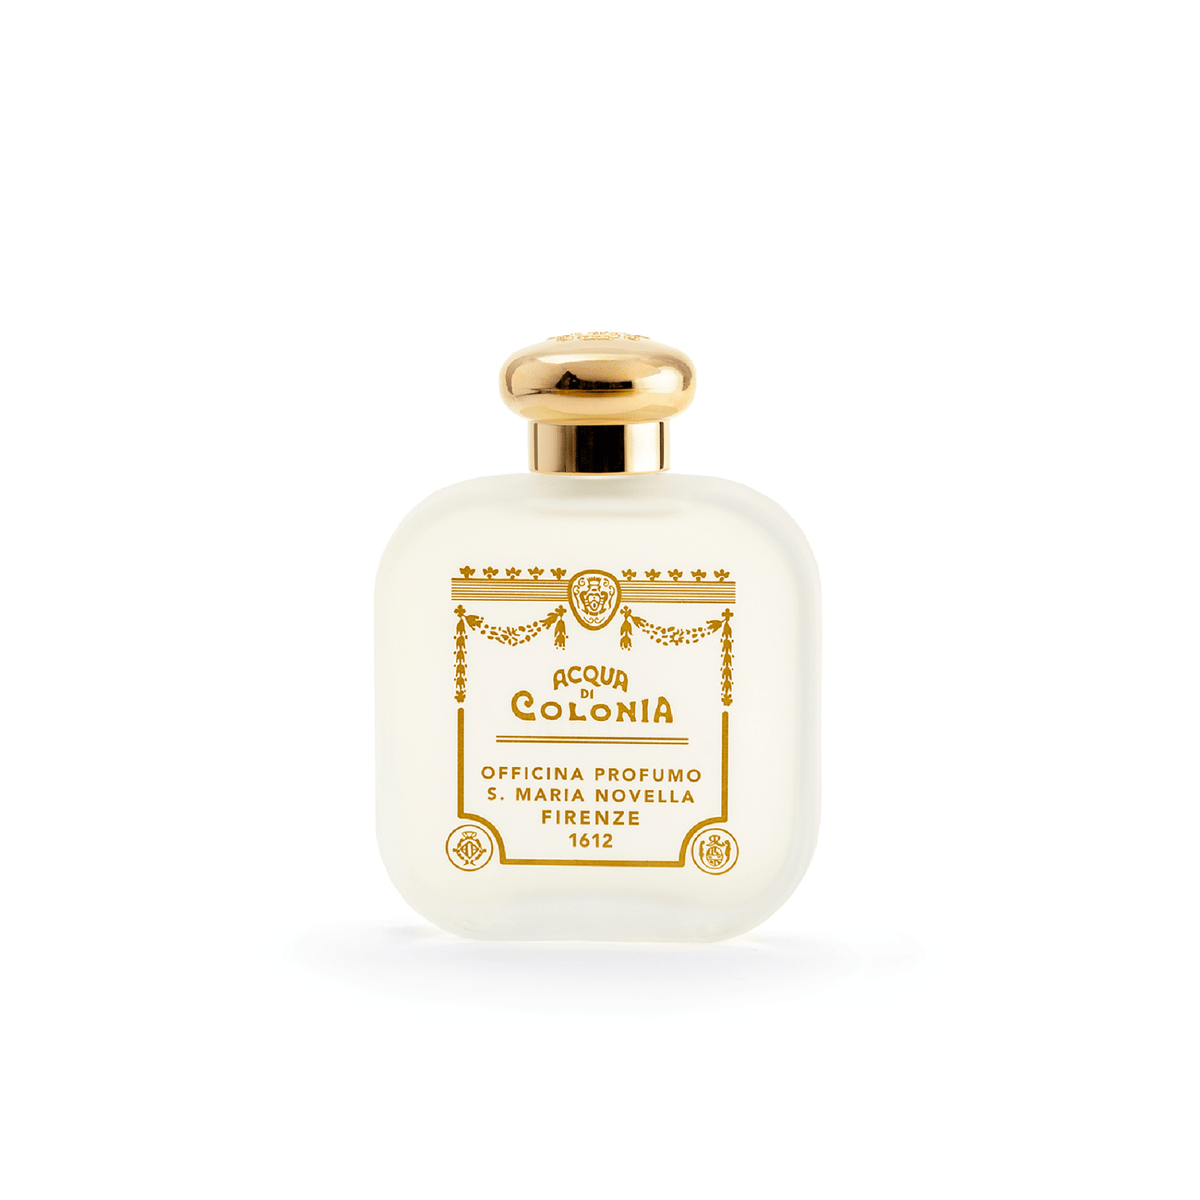 Primary Image of Lily of the Valley (Mughetto) Eau de Cologne